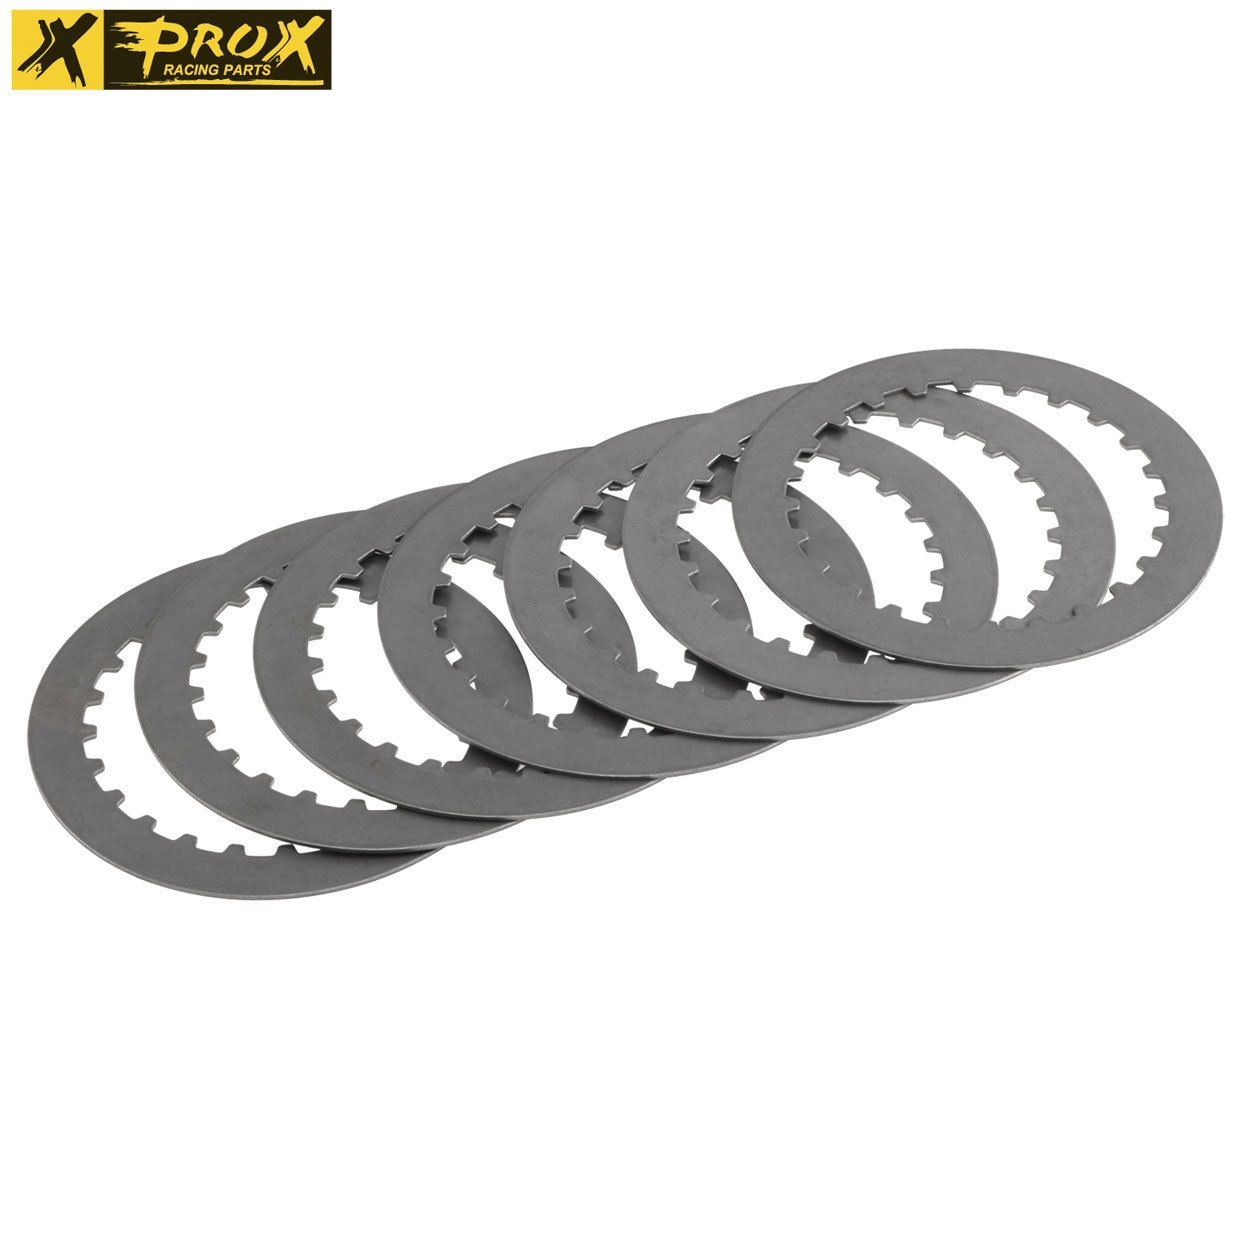 ProX Friction Plate Set YZ125 ’93-97 + YZ125 ’05-20 - ProX Racing Parts